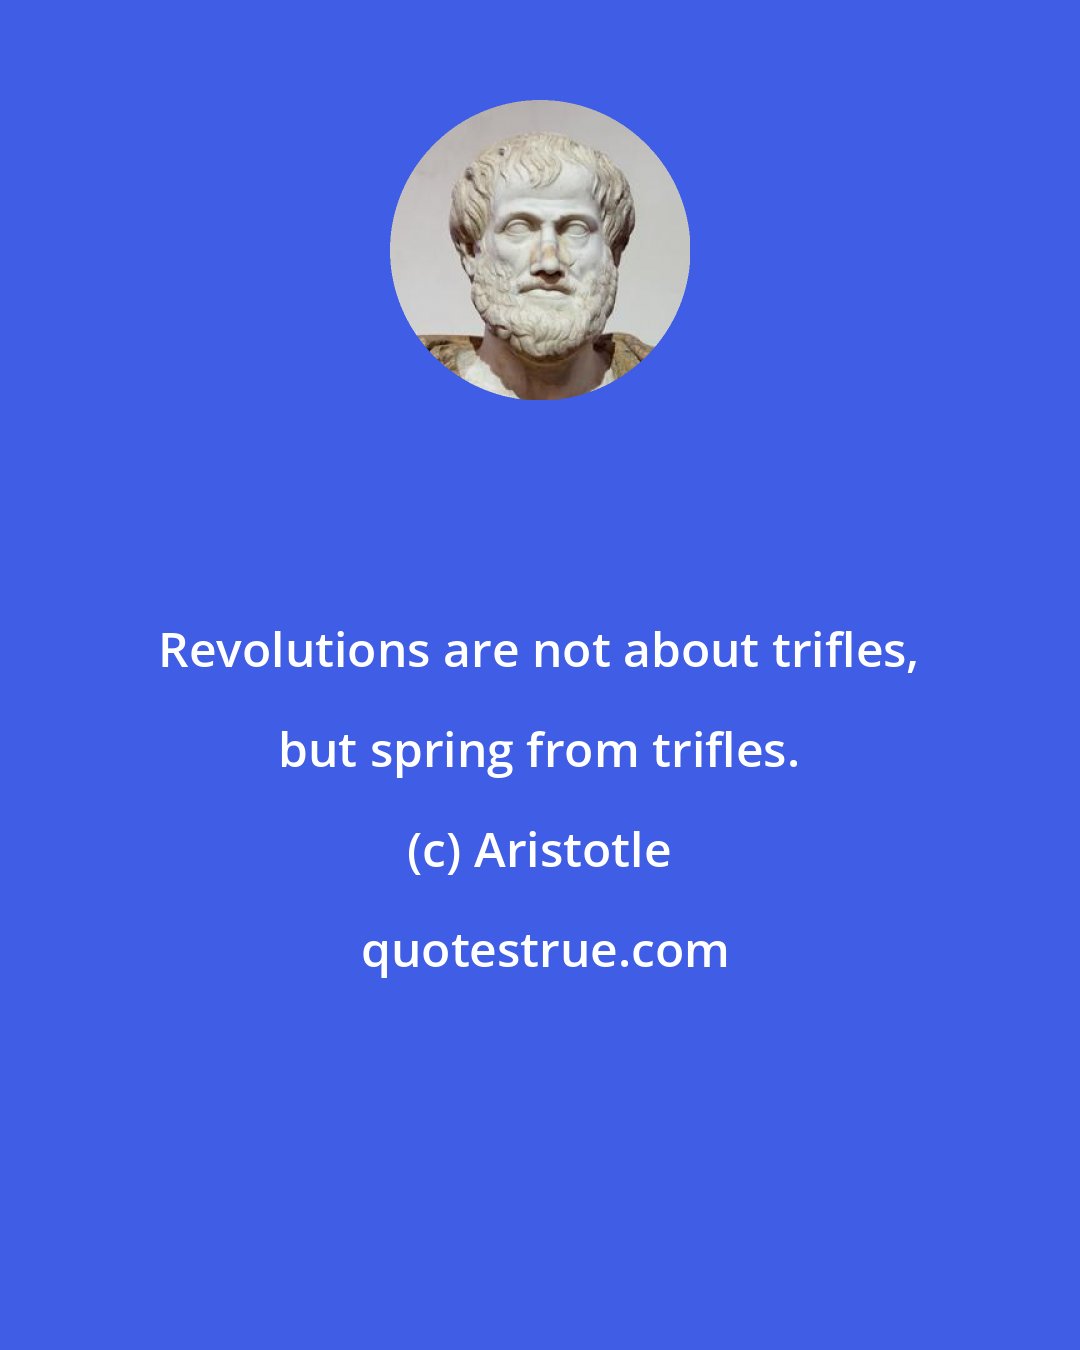 Aristotle: Revolutions are not about trifles, but spring from trifles.